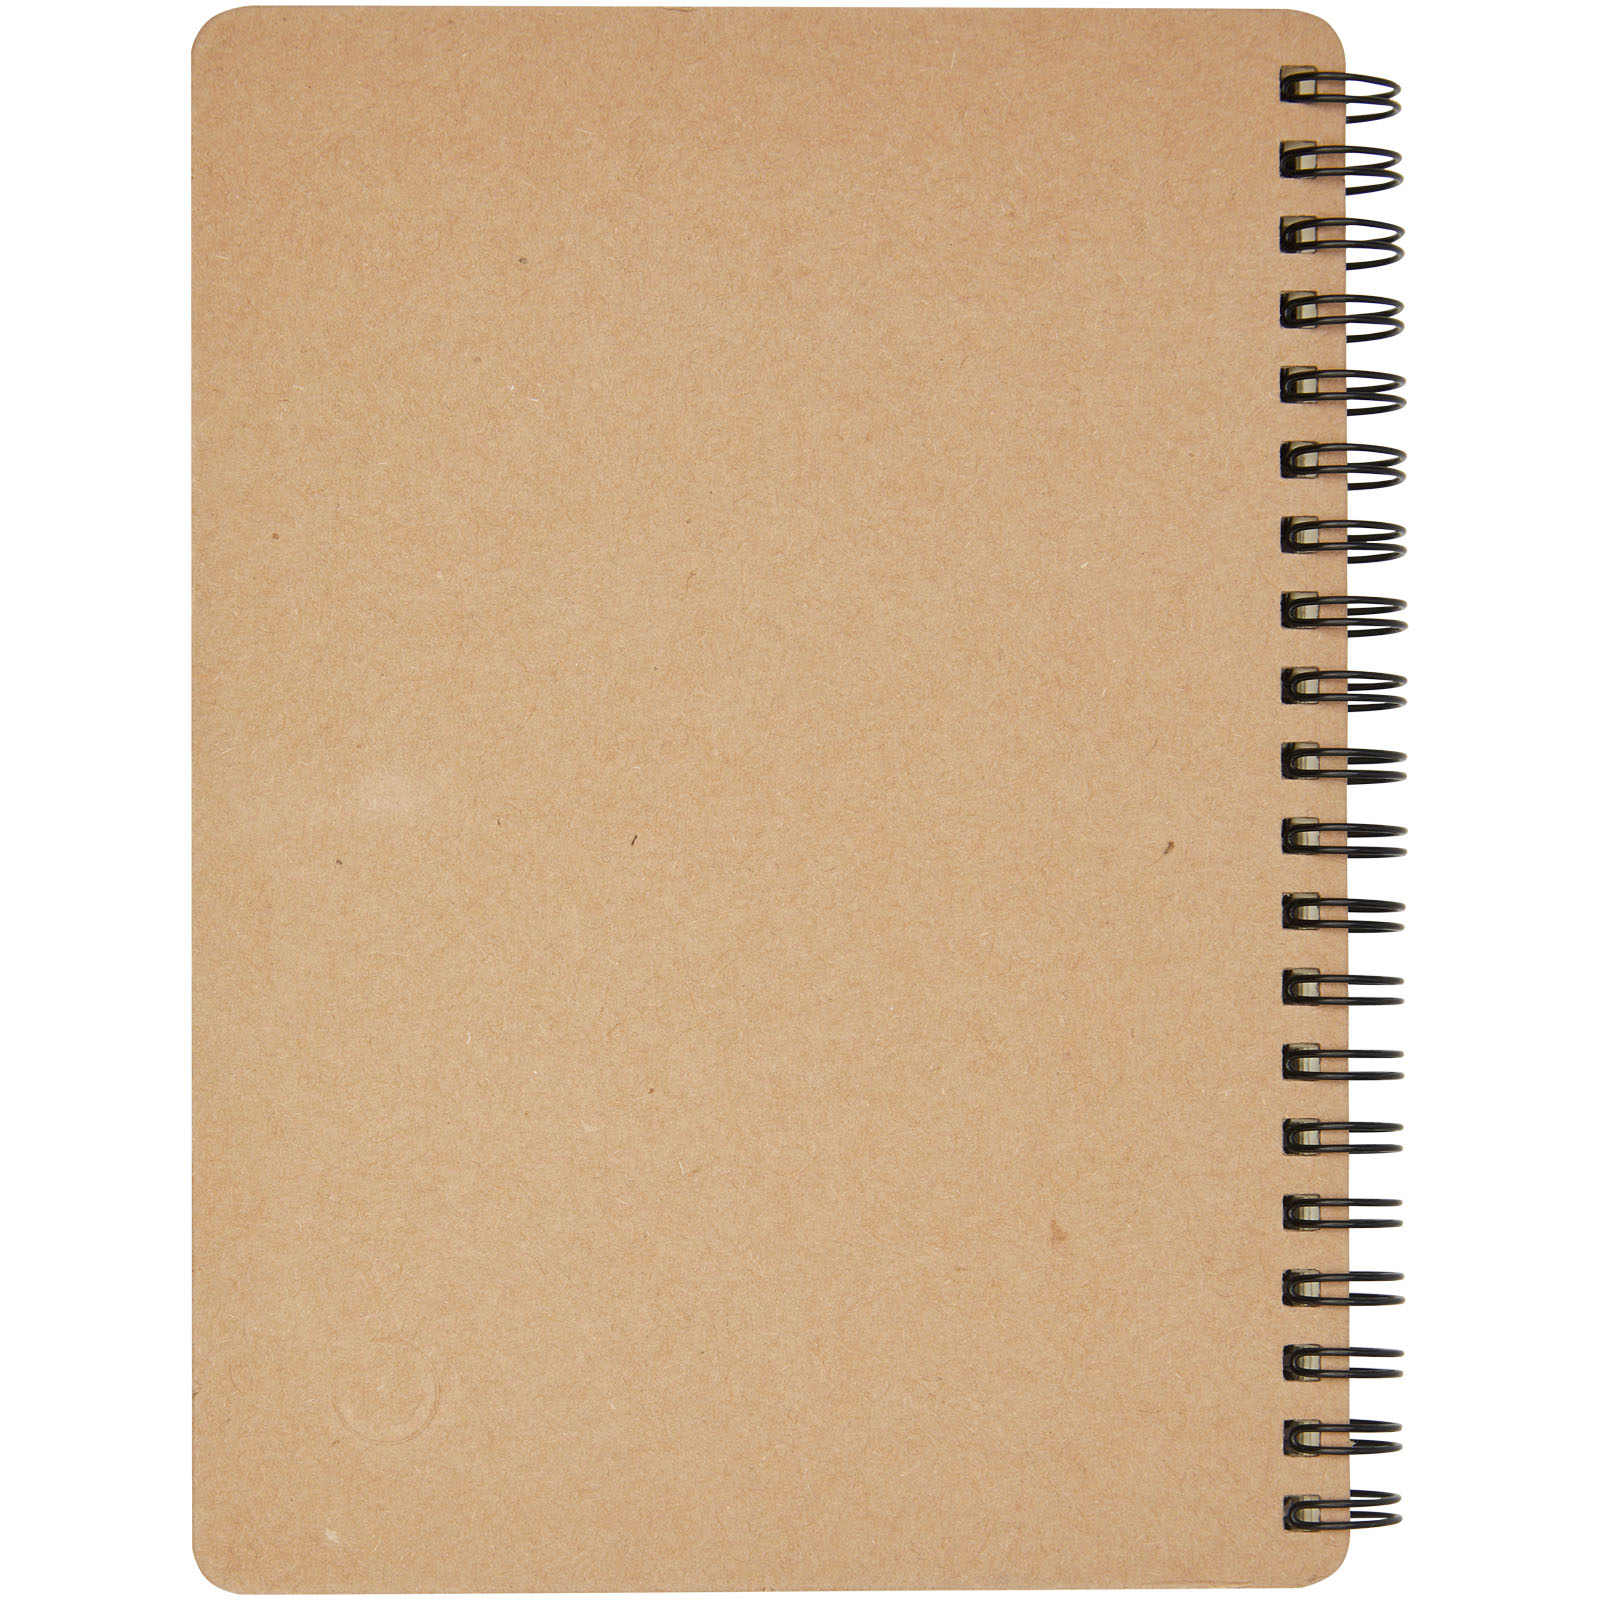 Advertising Hard cover notebooks - Priestly recycled notebook with pen - 2